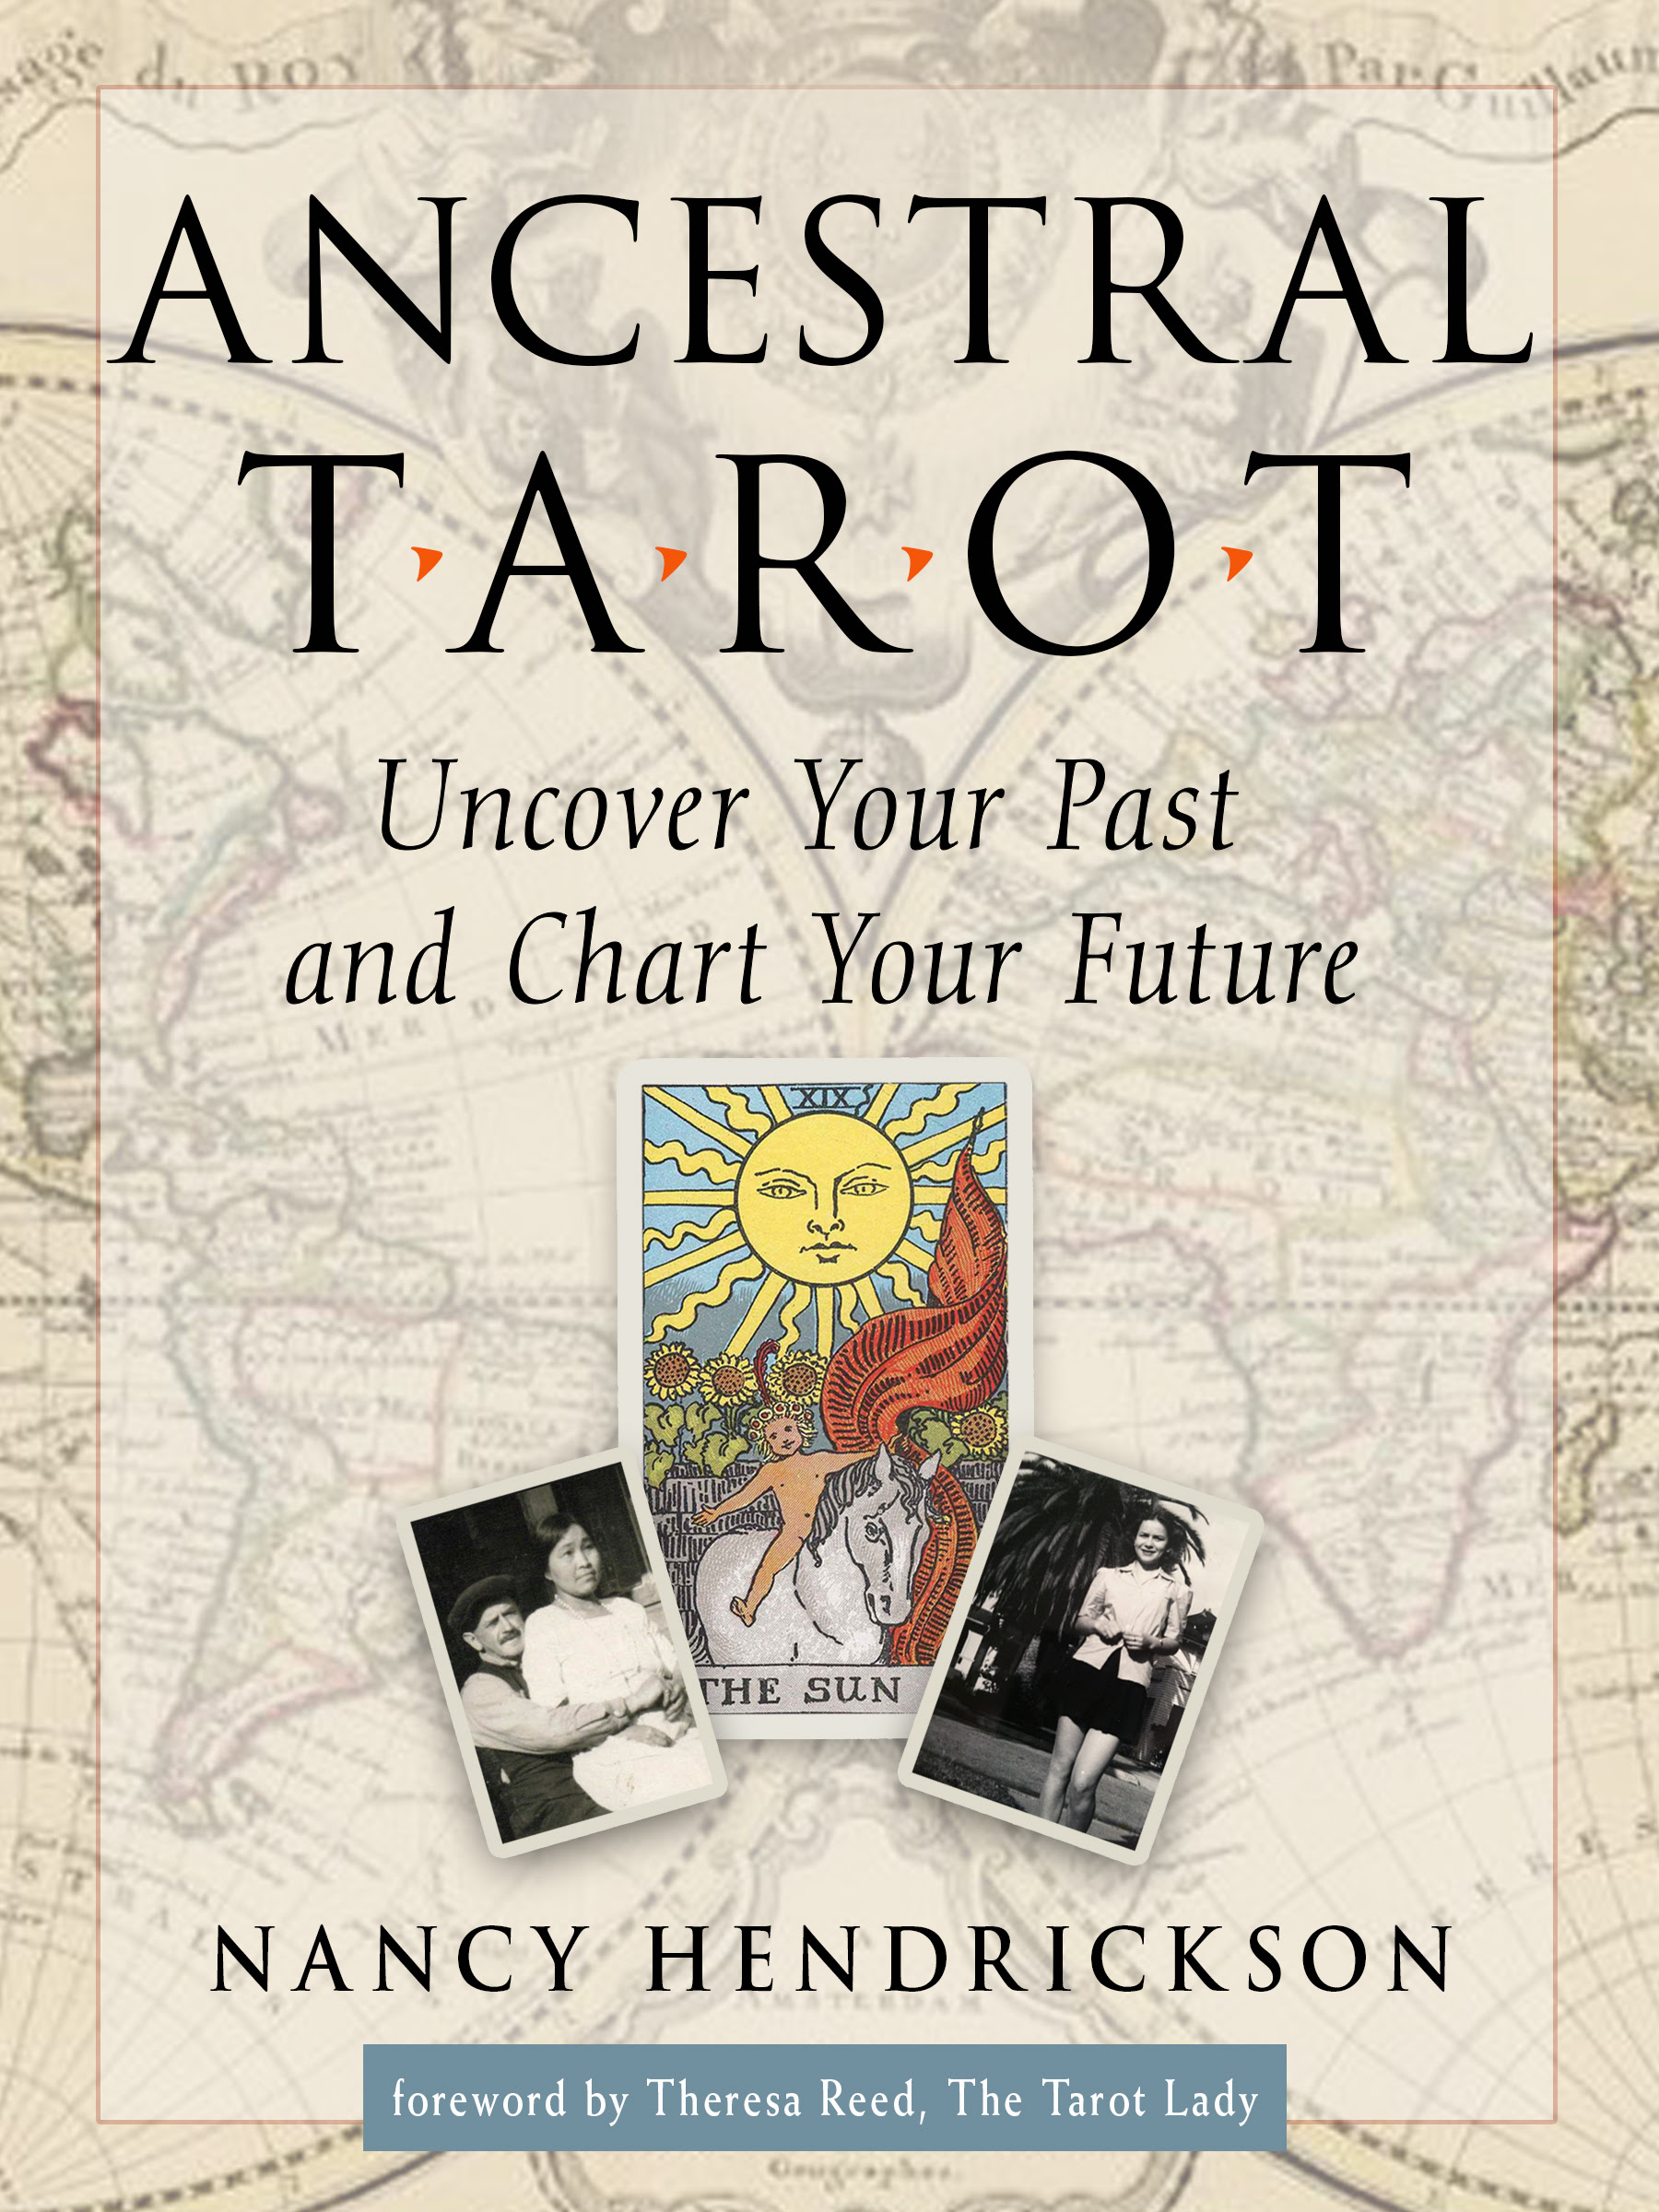 Ancestral Tarot: Uncover Your Past and Chart Your Future PDF